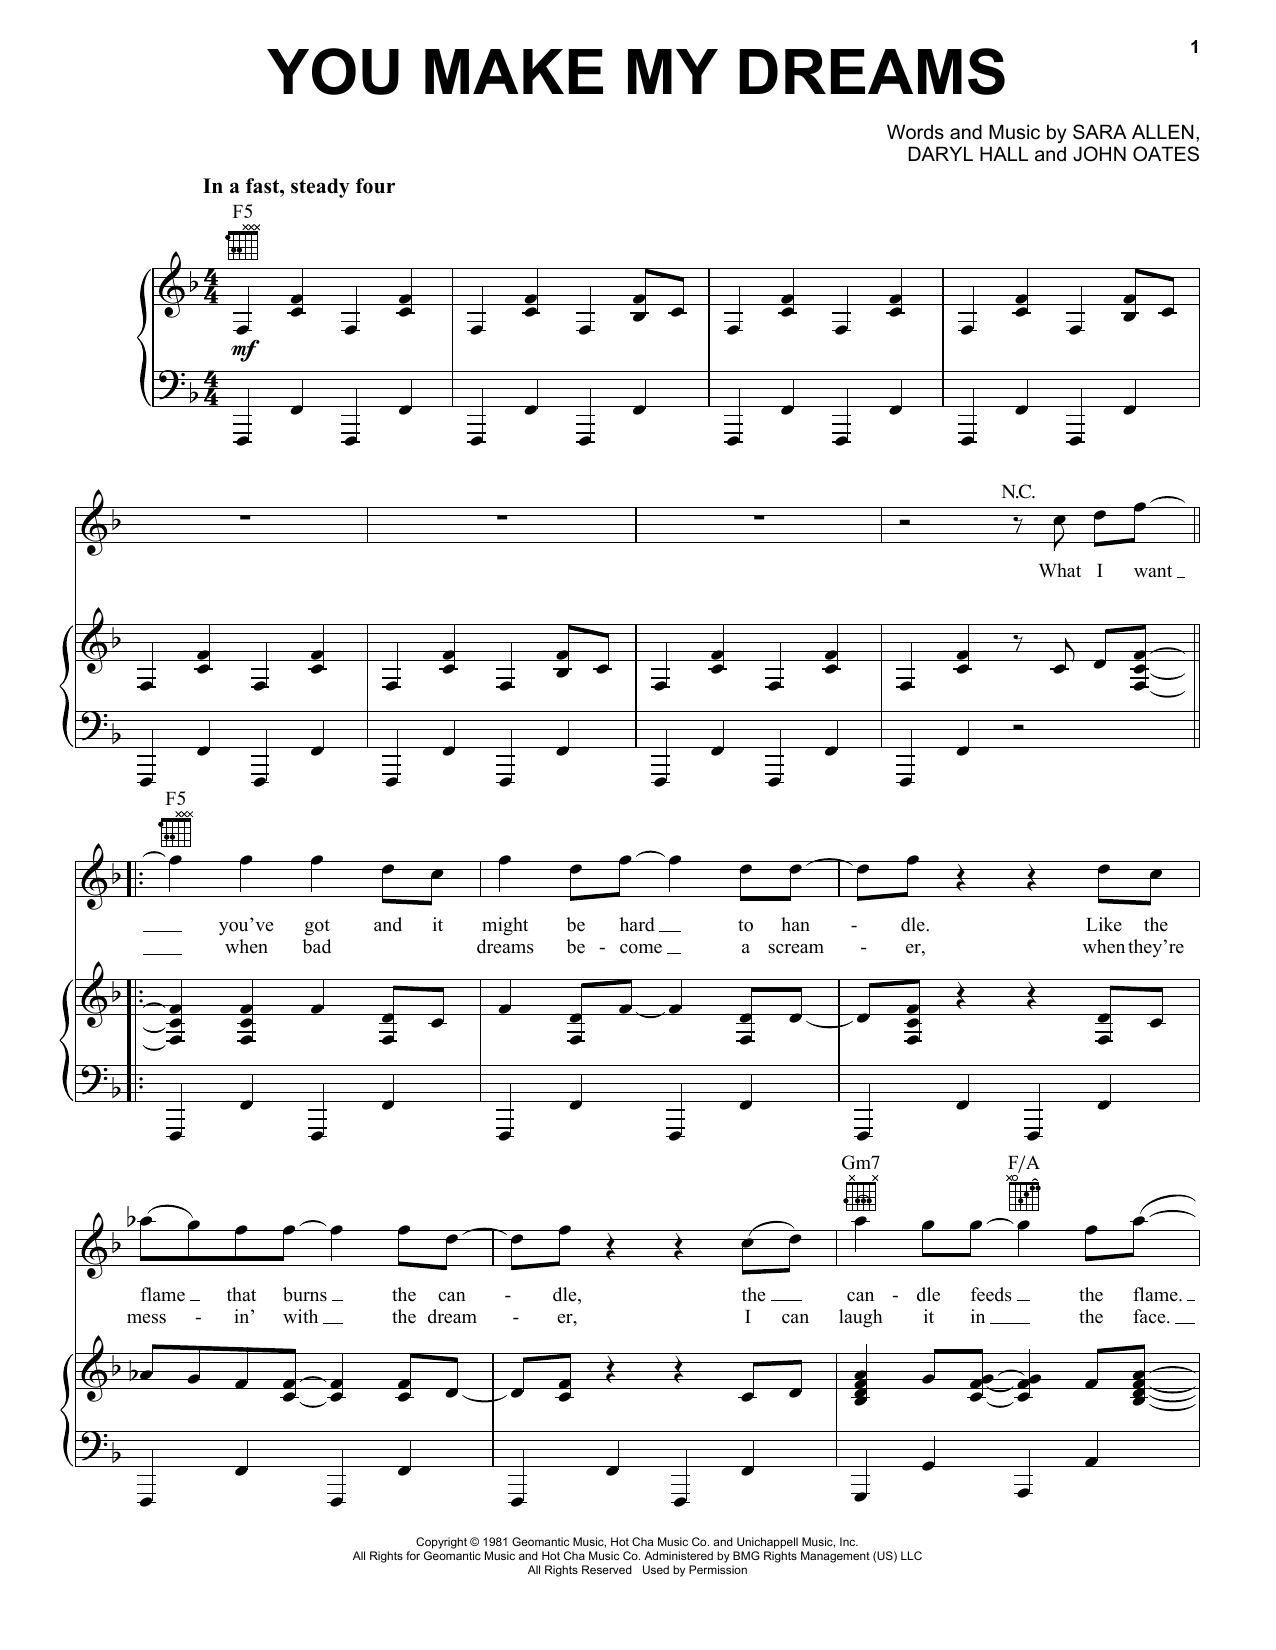 Download Hall & Oates You Make My Dreams Sheet Music